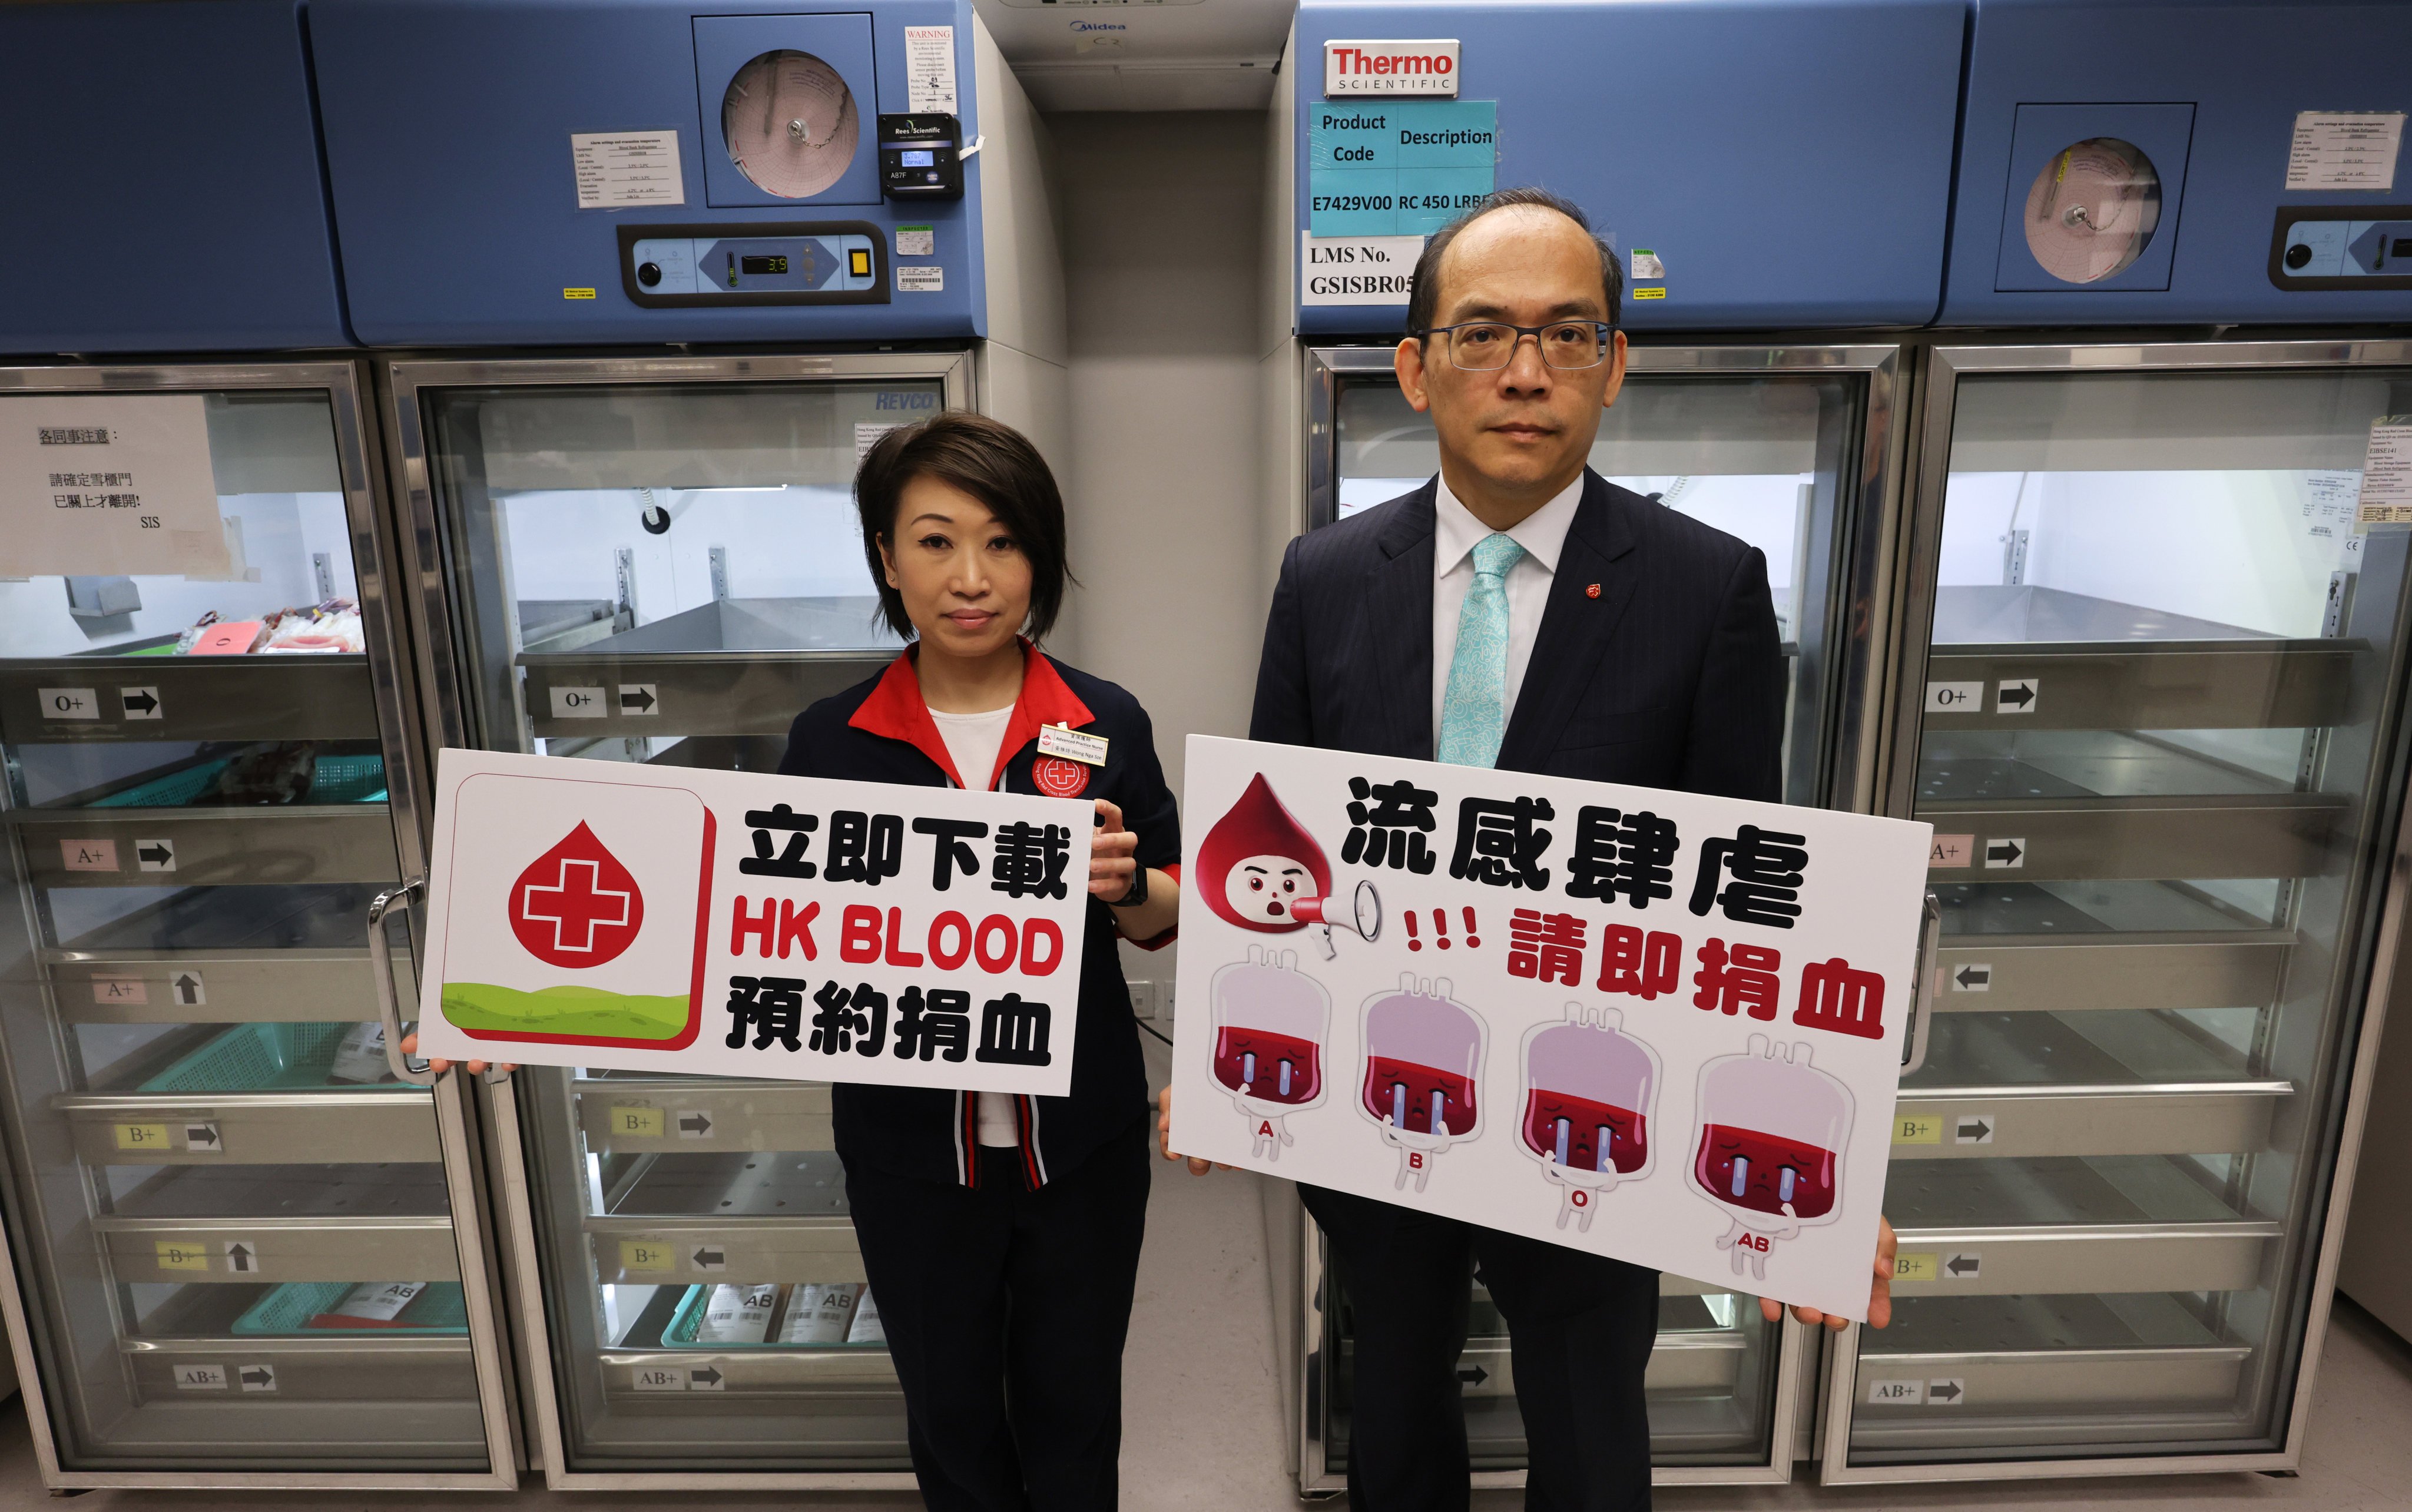 Lee Cheuk-kwong (right), the chief executive and medical director of Hong Kong Red Cross Blood Transfusion Service, says the number of regular donors has declined in recent weeks due to flu-related illnesses. Photo: May Tse